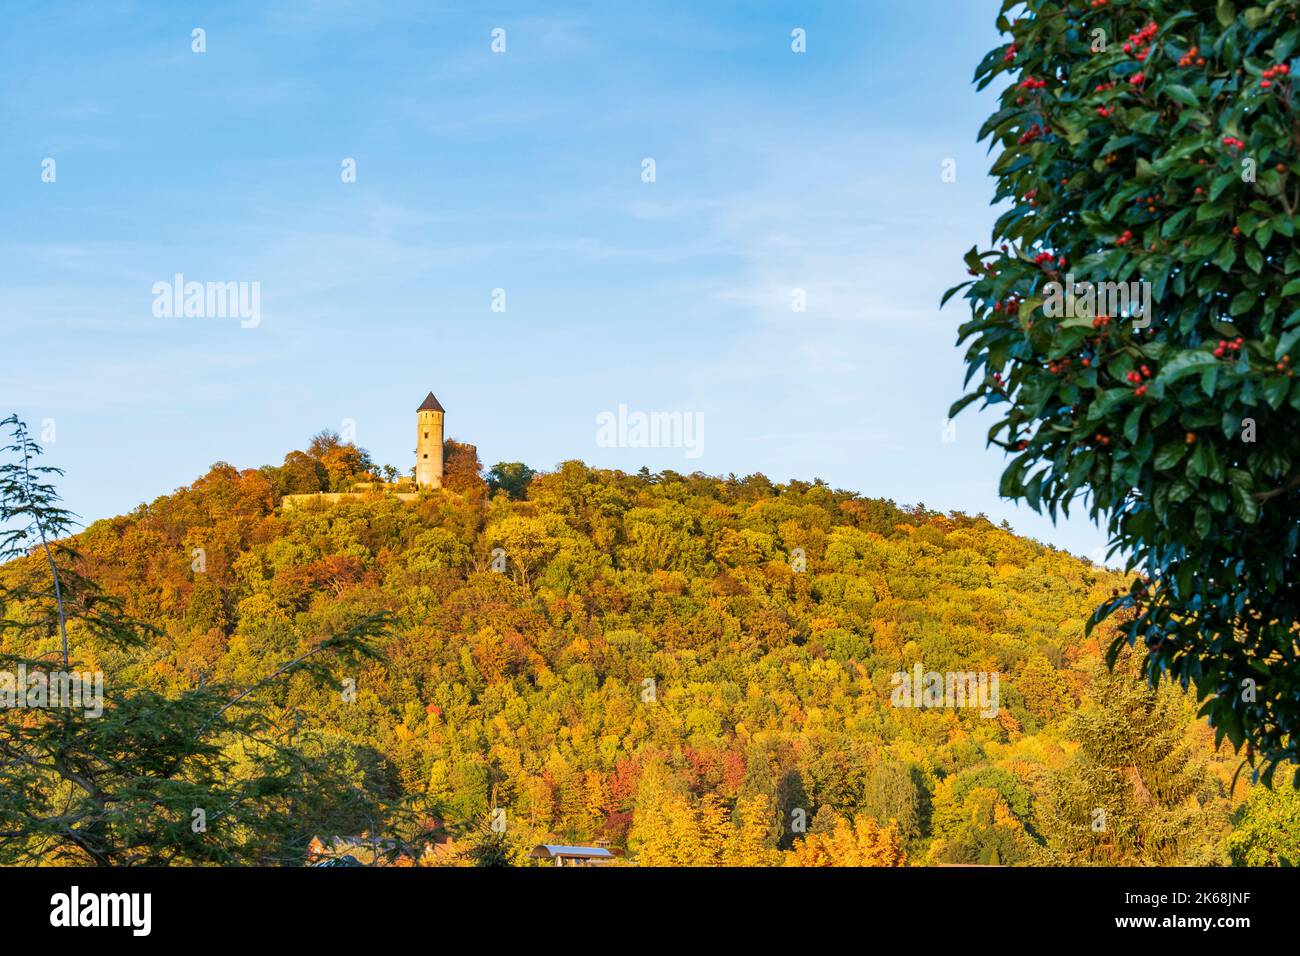 Mountain with autumnal forest and medieval castle ruins, Plesse Castle Germany Stock Photo